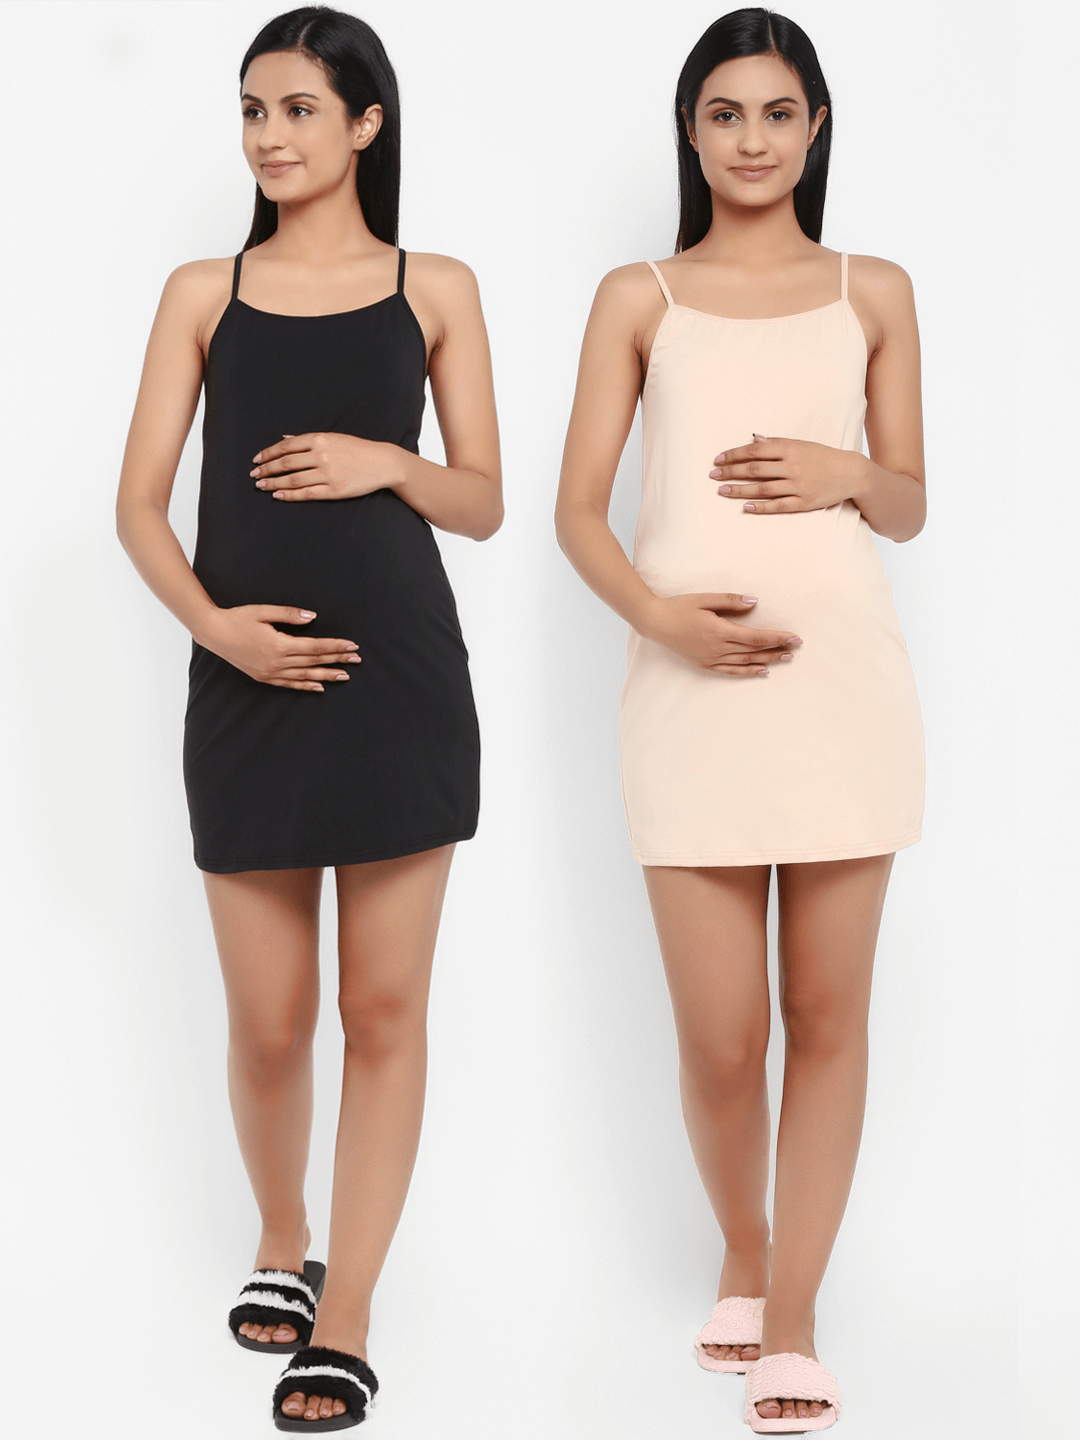 Cotton Maternity Camisoles - Pack of 2